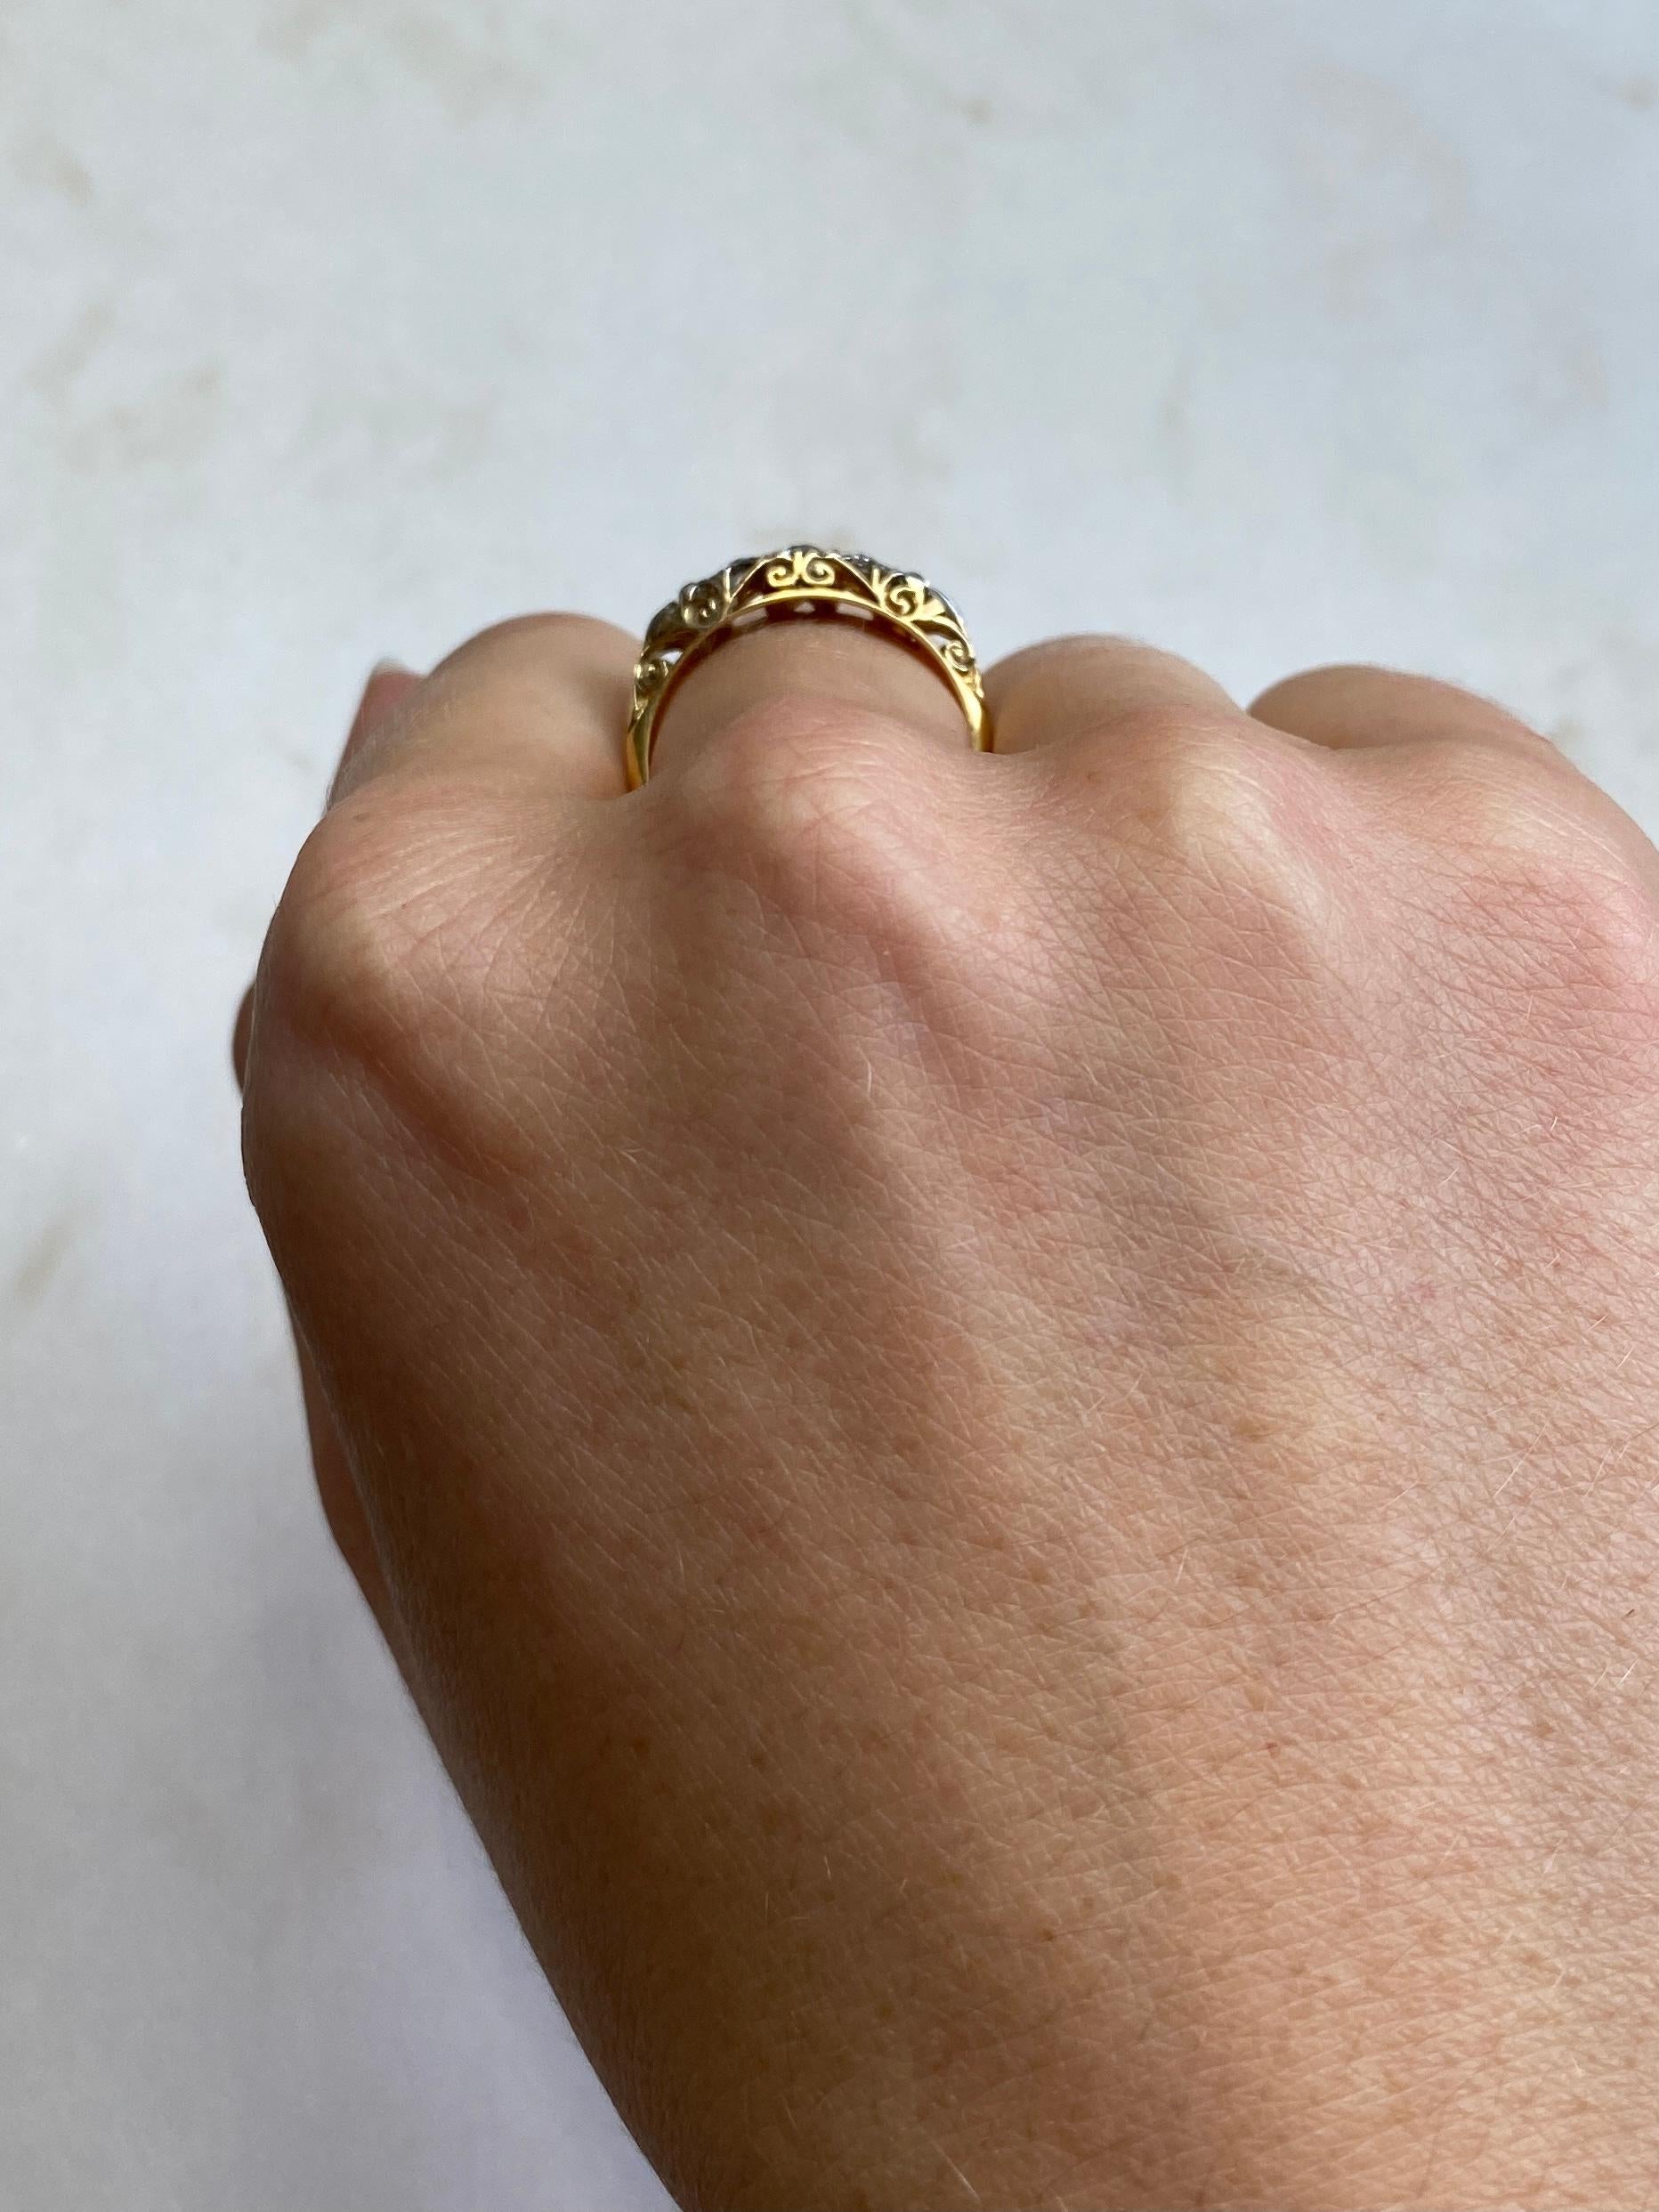 Five glistening diamonds sit fabulously on top of a simple setting modelled in 18ct gold. The diamond total is 50pts. 

Ring Size: P or 7 1/2 
Width: 5mm
Height Off Finger: 4mm

Weight: 2.86g